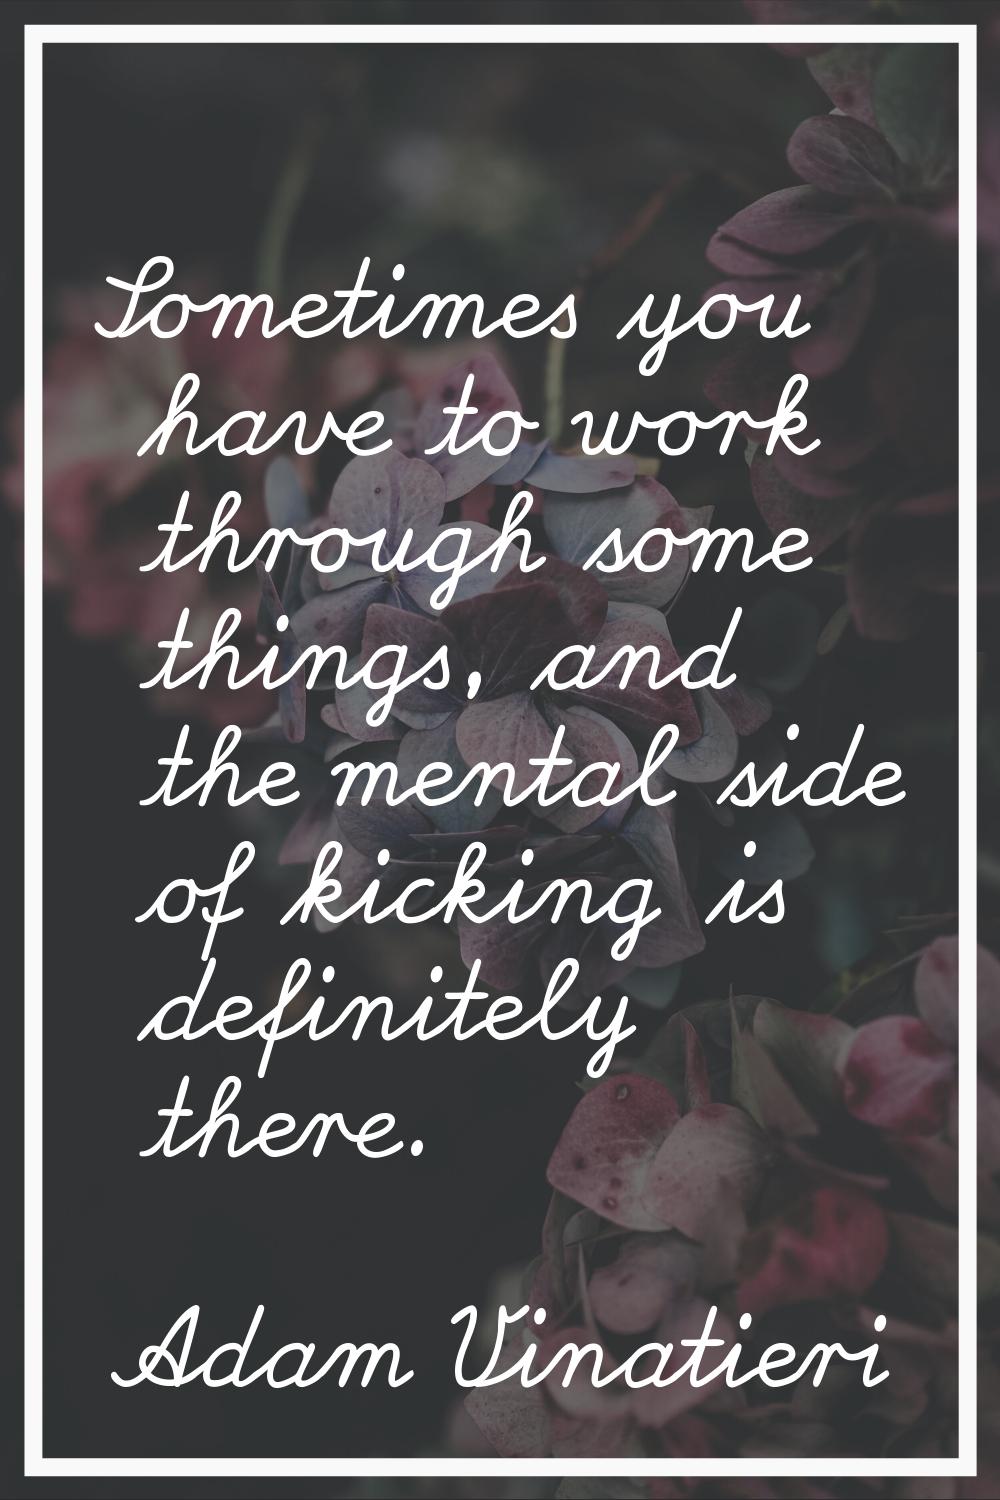 Sometimes you have to work through some things, and the mental side of kicking is definitely there.